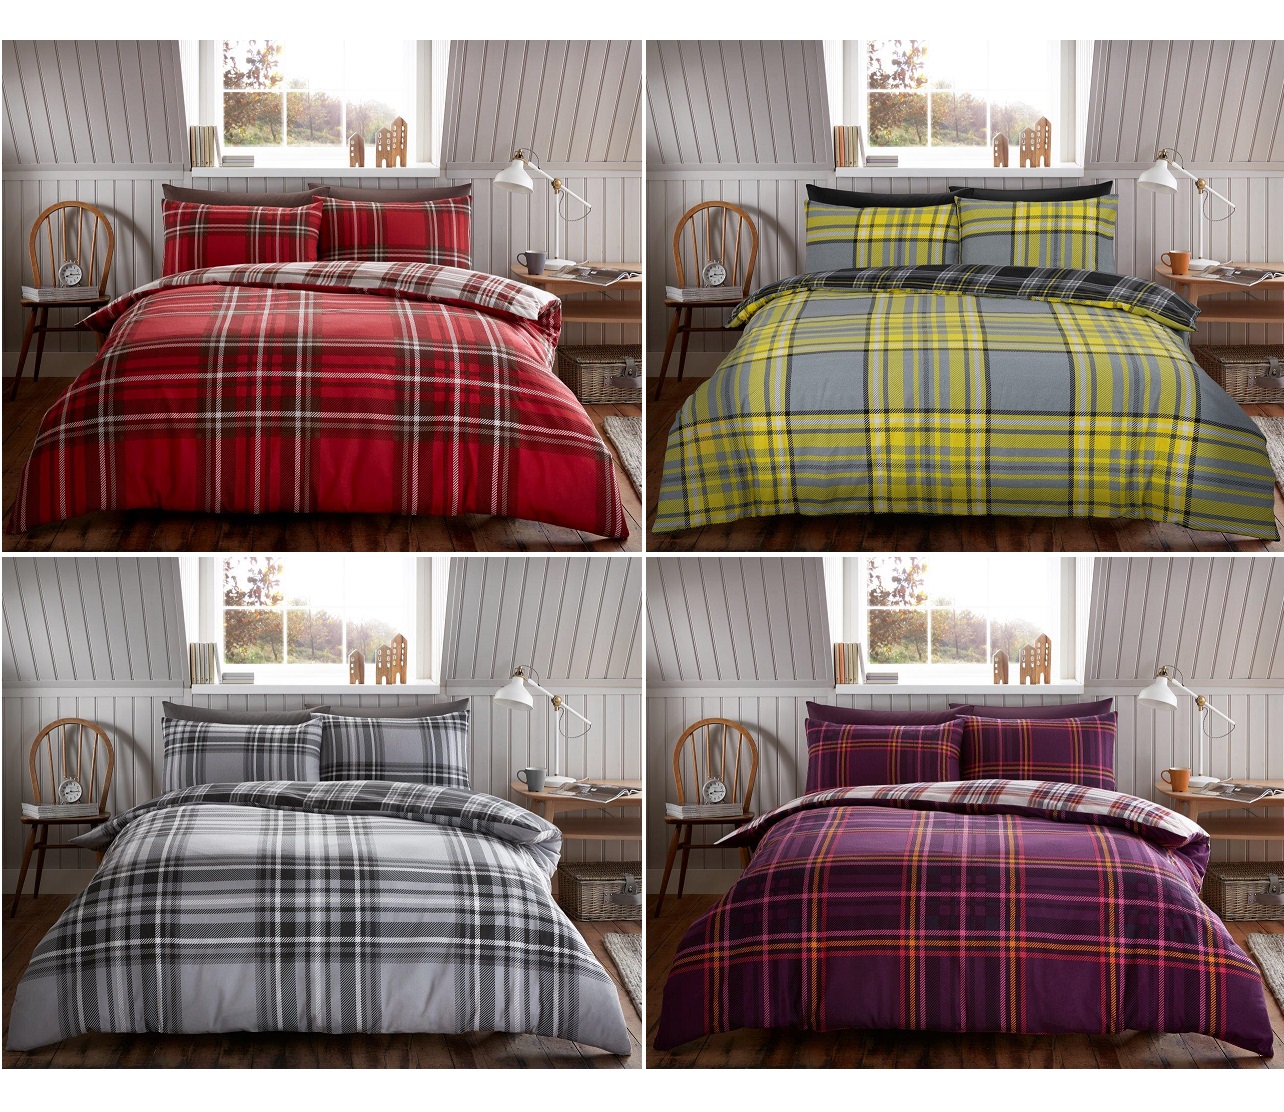 EDS Flannelette Duvet Cover 100% Brushed Cotton Tartan Check Flannel Thermal Winter Bedding Duvet Cover Set Luxury Super Soft With Matching Colour Pillow Cases Double Purple